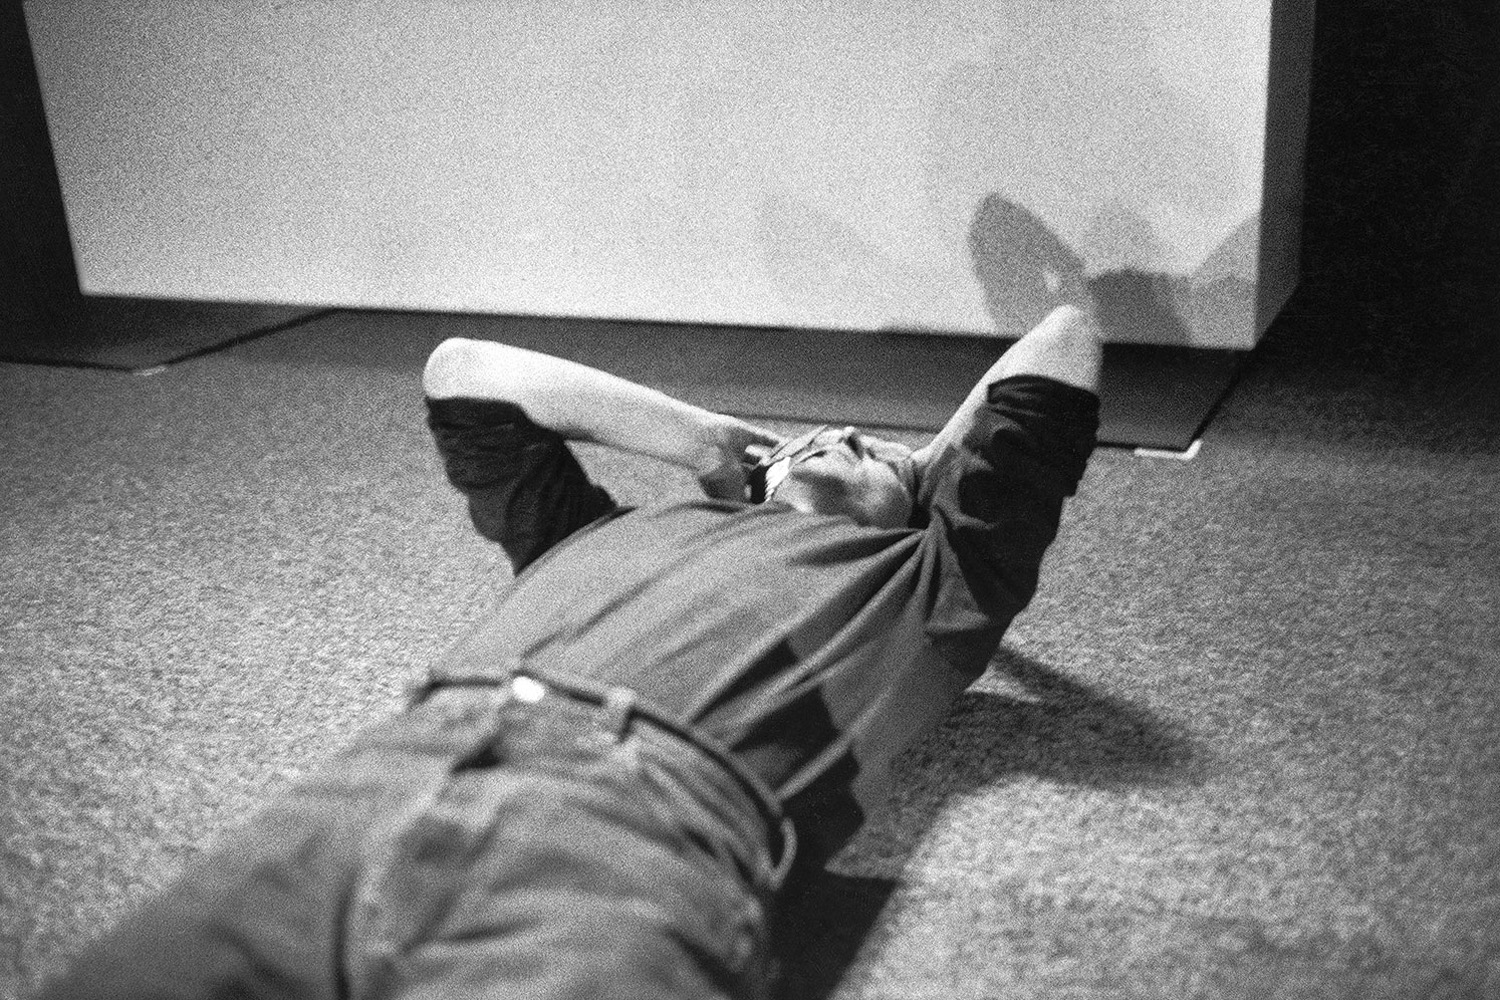 Lying on the floor after a long day, Jobs finalizes a deal with Bill Gates over the phone, whereby Microsoft would purchase $150 million worth of Apple stock.